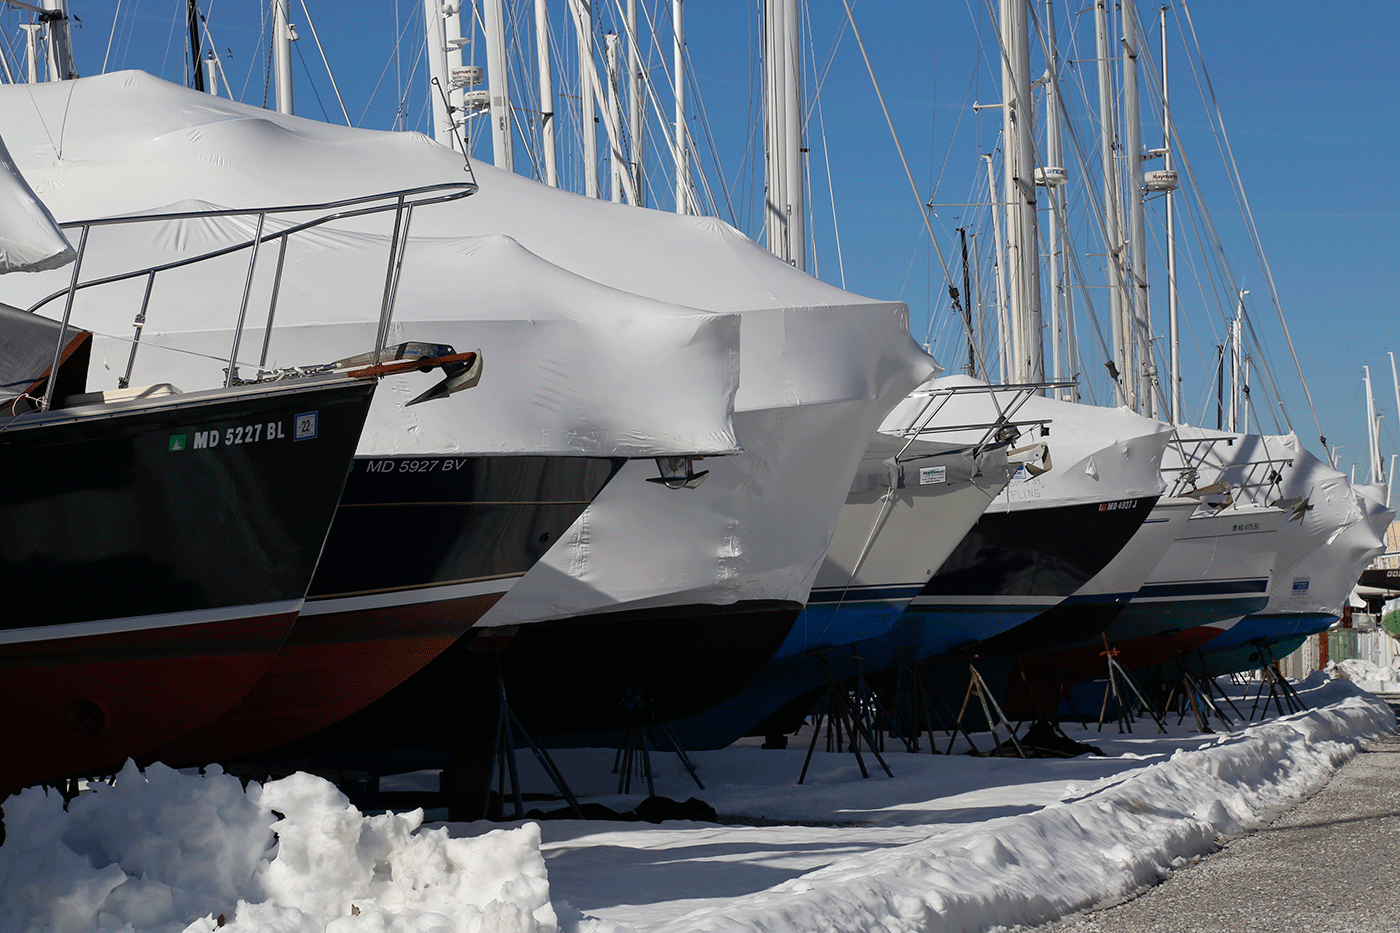 A row of covered boats await their grand unveiling come springtime.